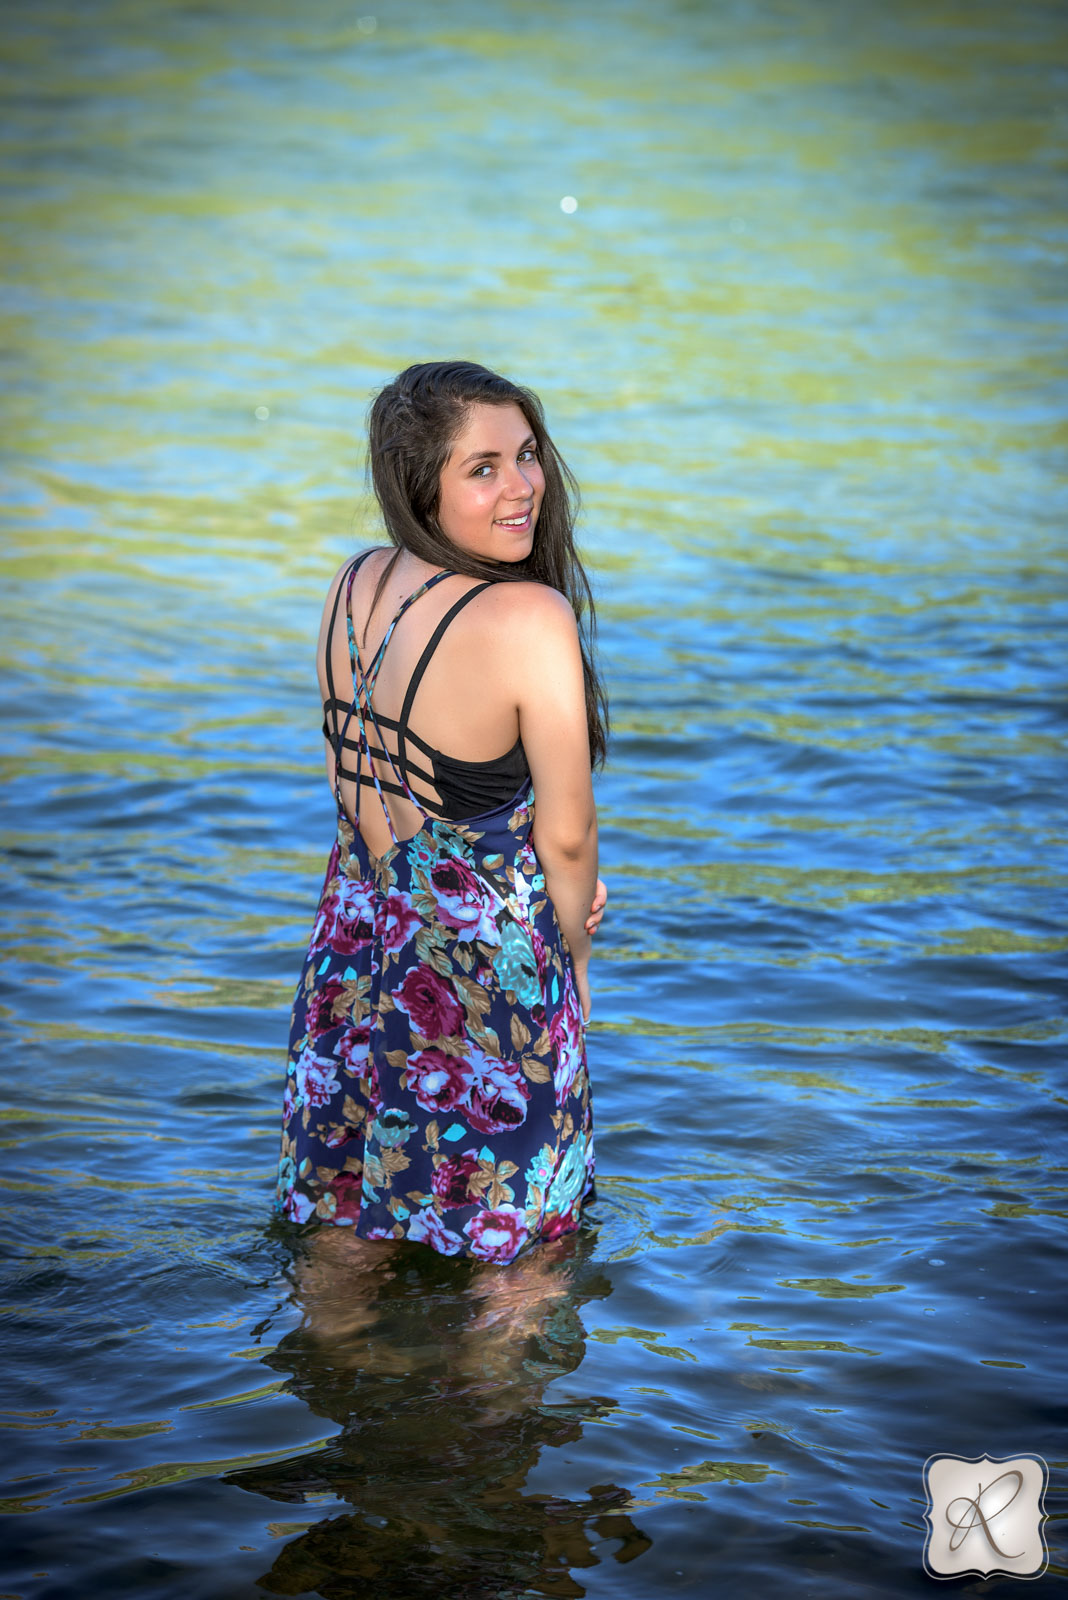 Senior Pictures in water